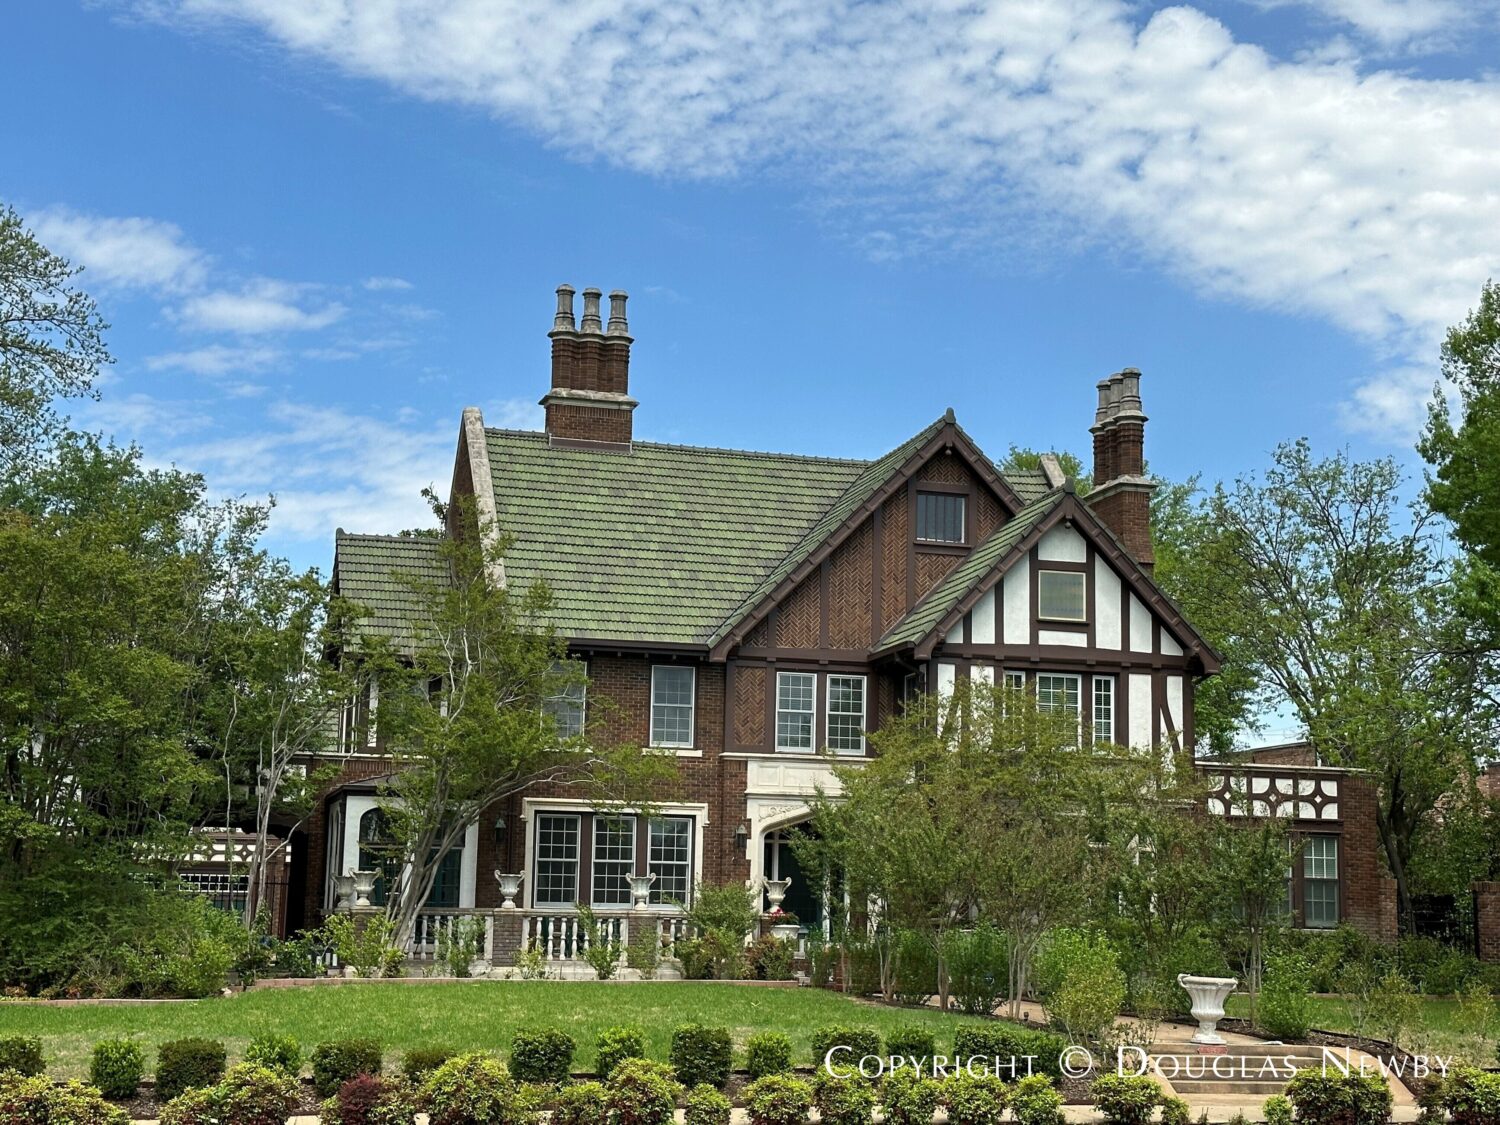 Preservation Dallas has selected this Swiss Avenue Historic District home for its 50th Anniversary Home Tour.